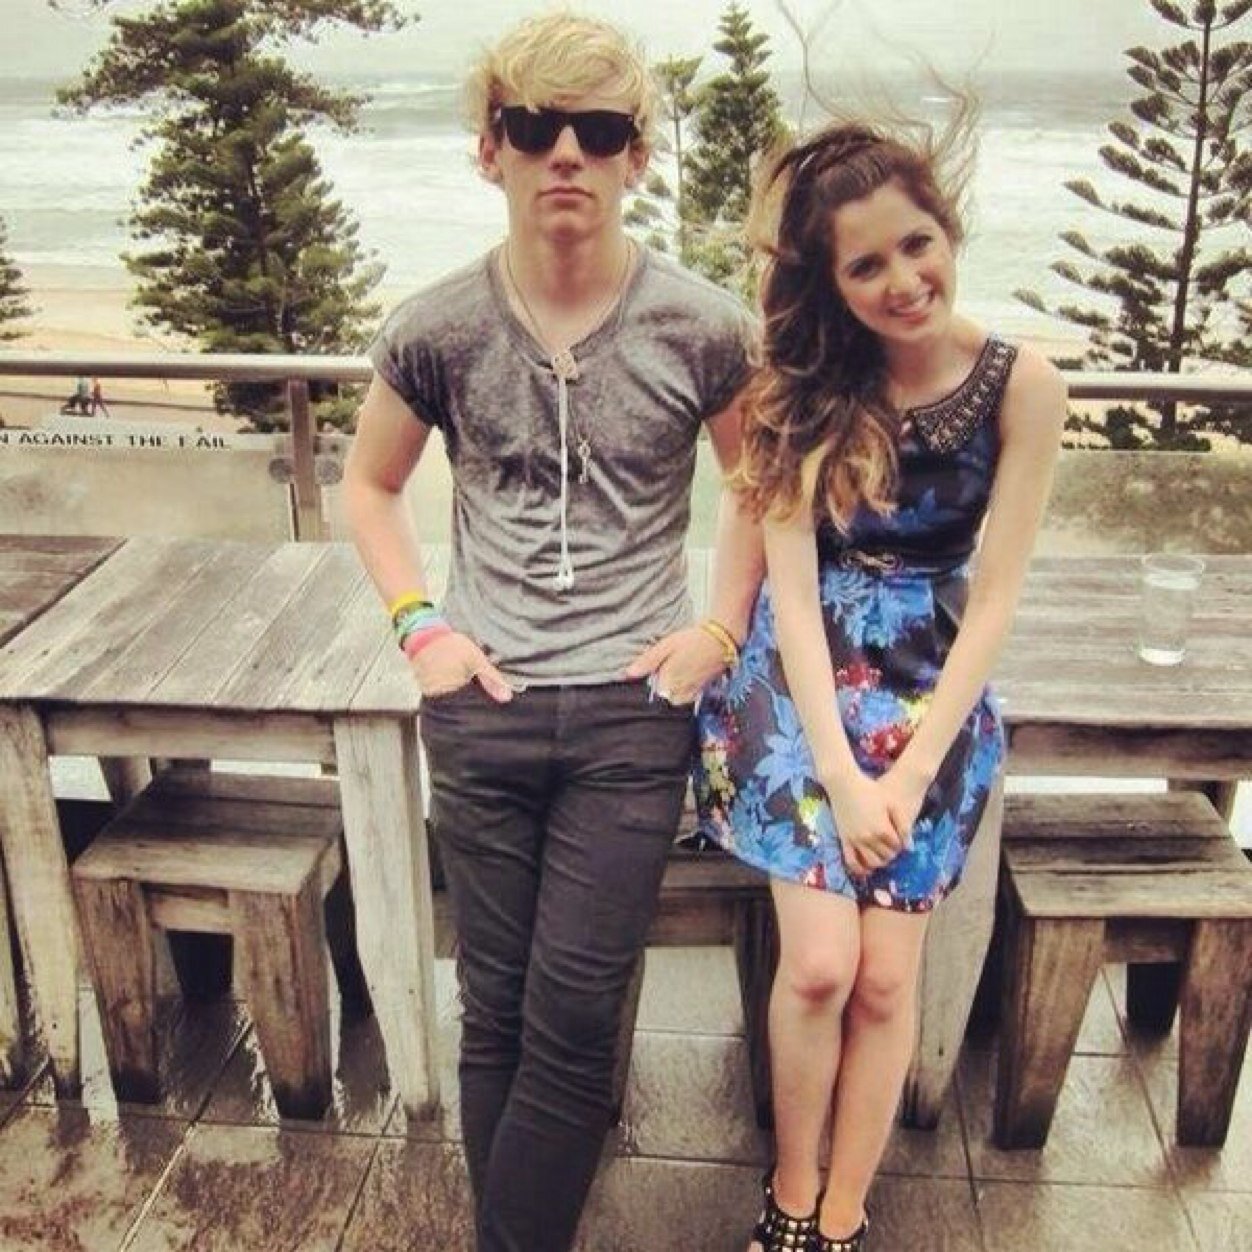 austin and ally season 2 ross and laura